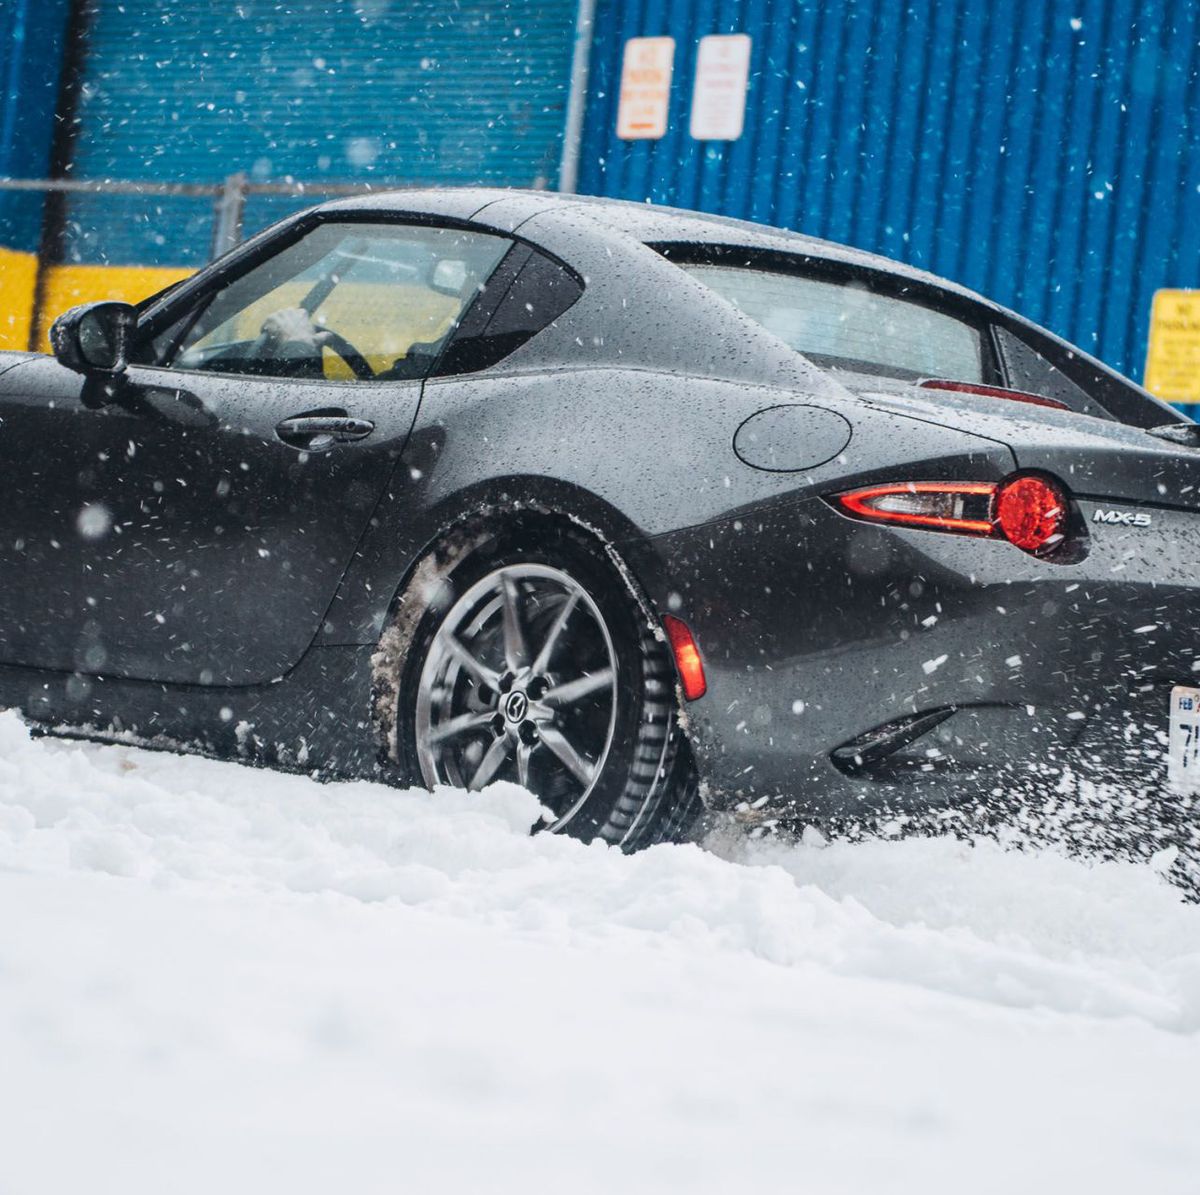 Winter Tires Buying Guide - Do I Need Snow Tires?